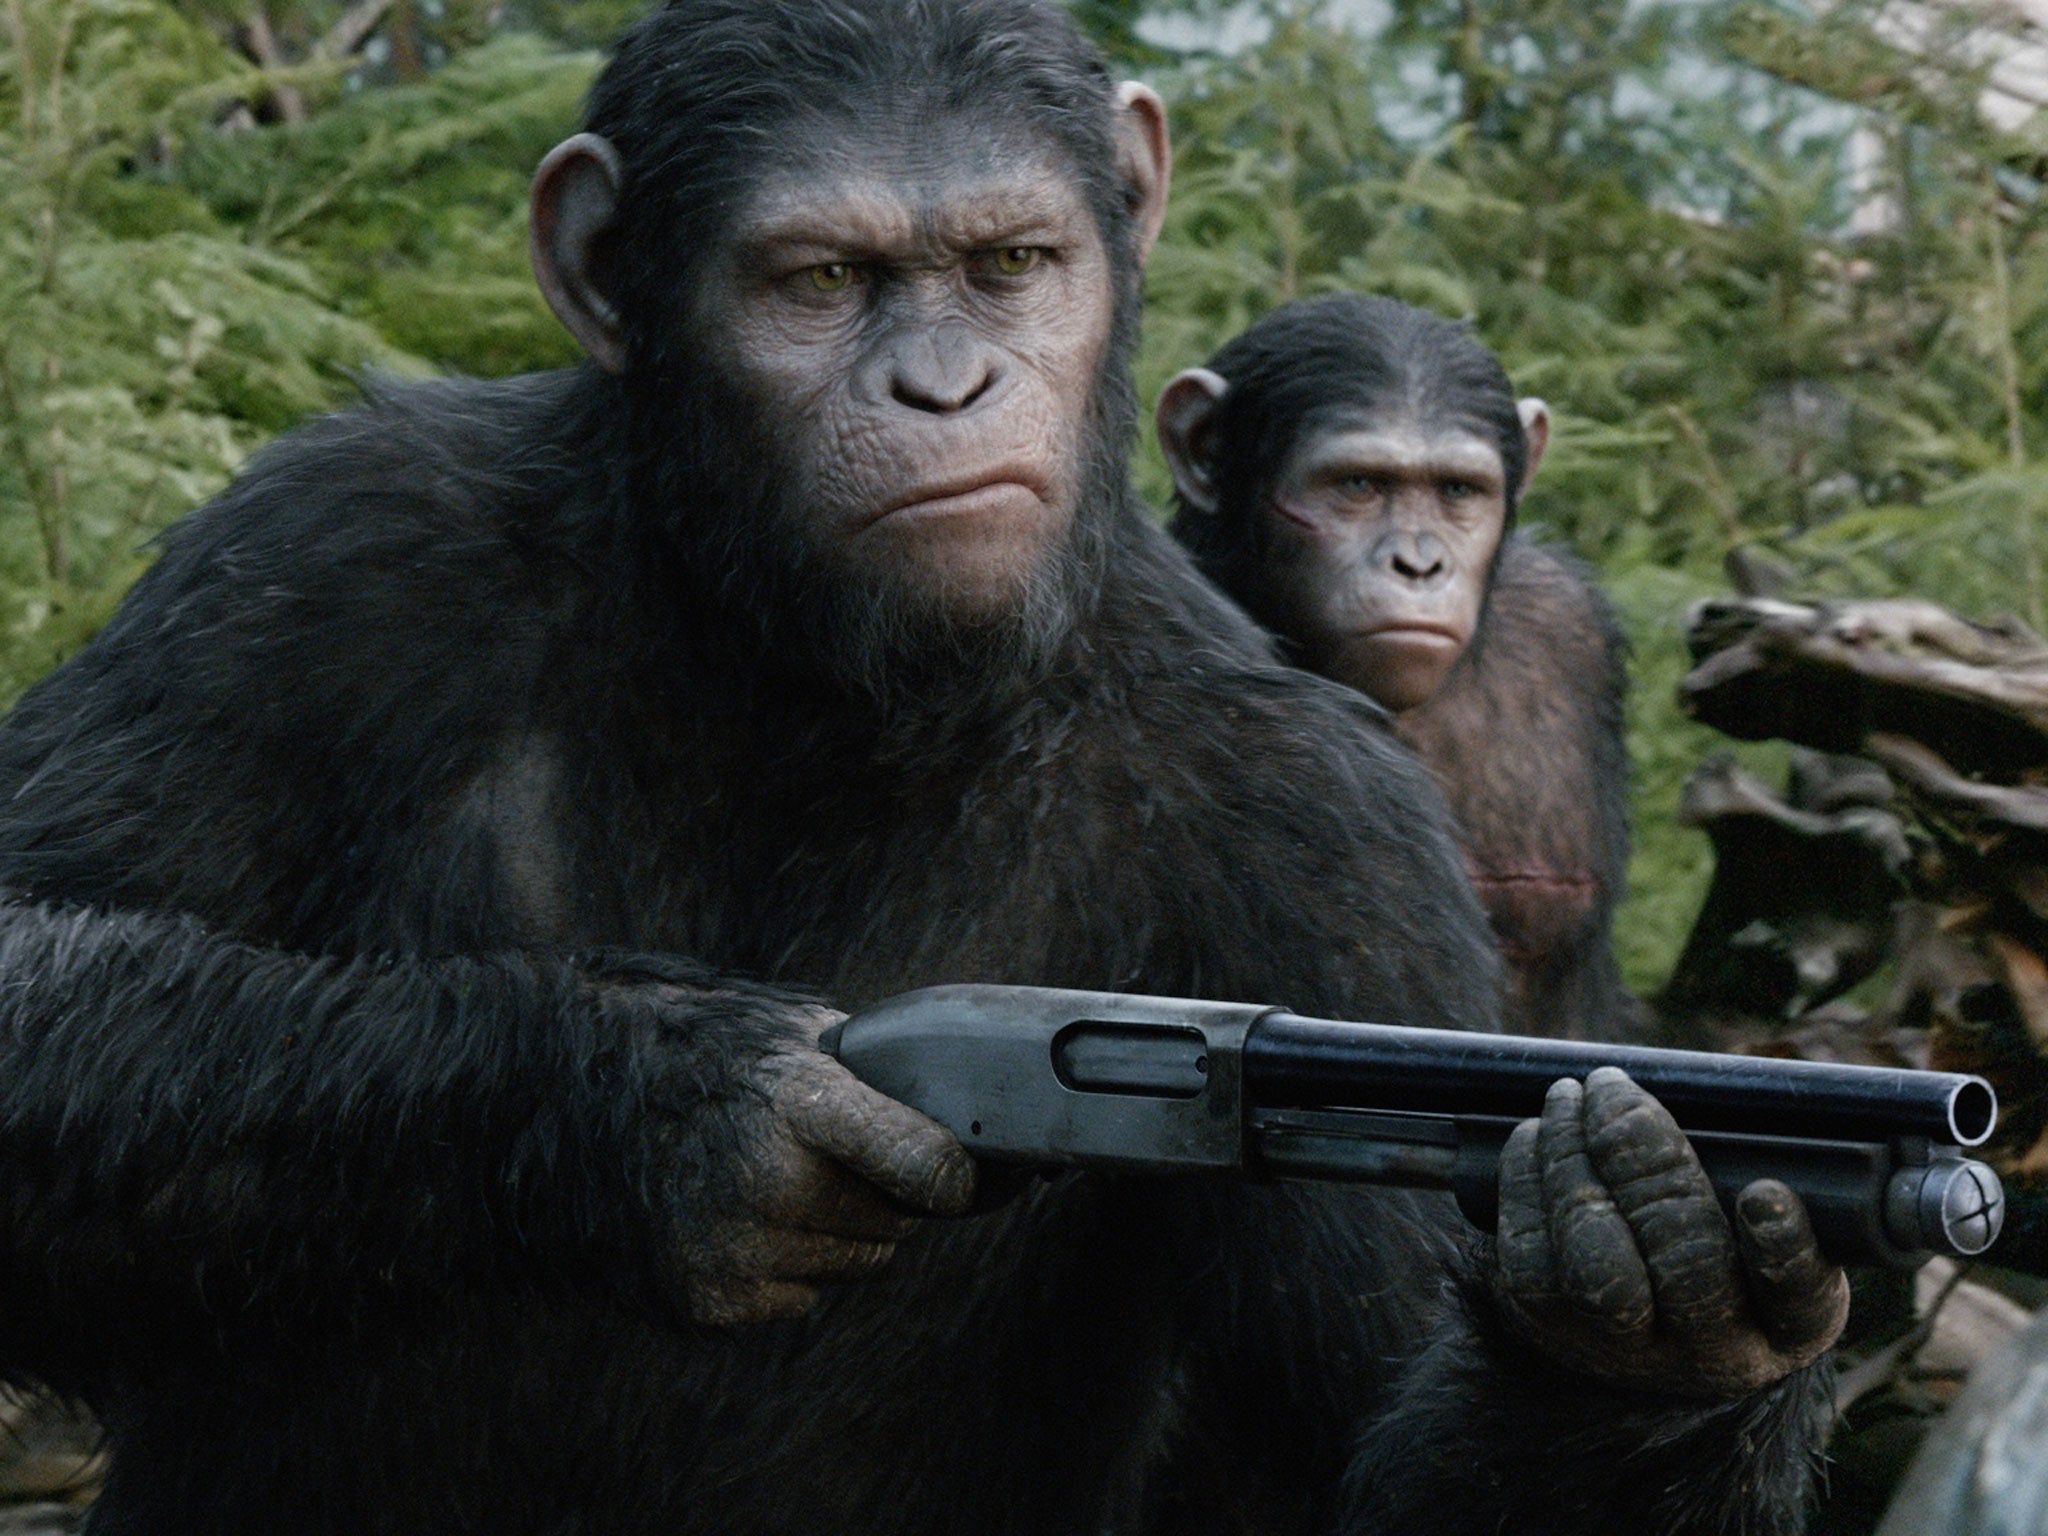 A still from the worldwide Dawn of the Planet of the Apes trailer debut